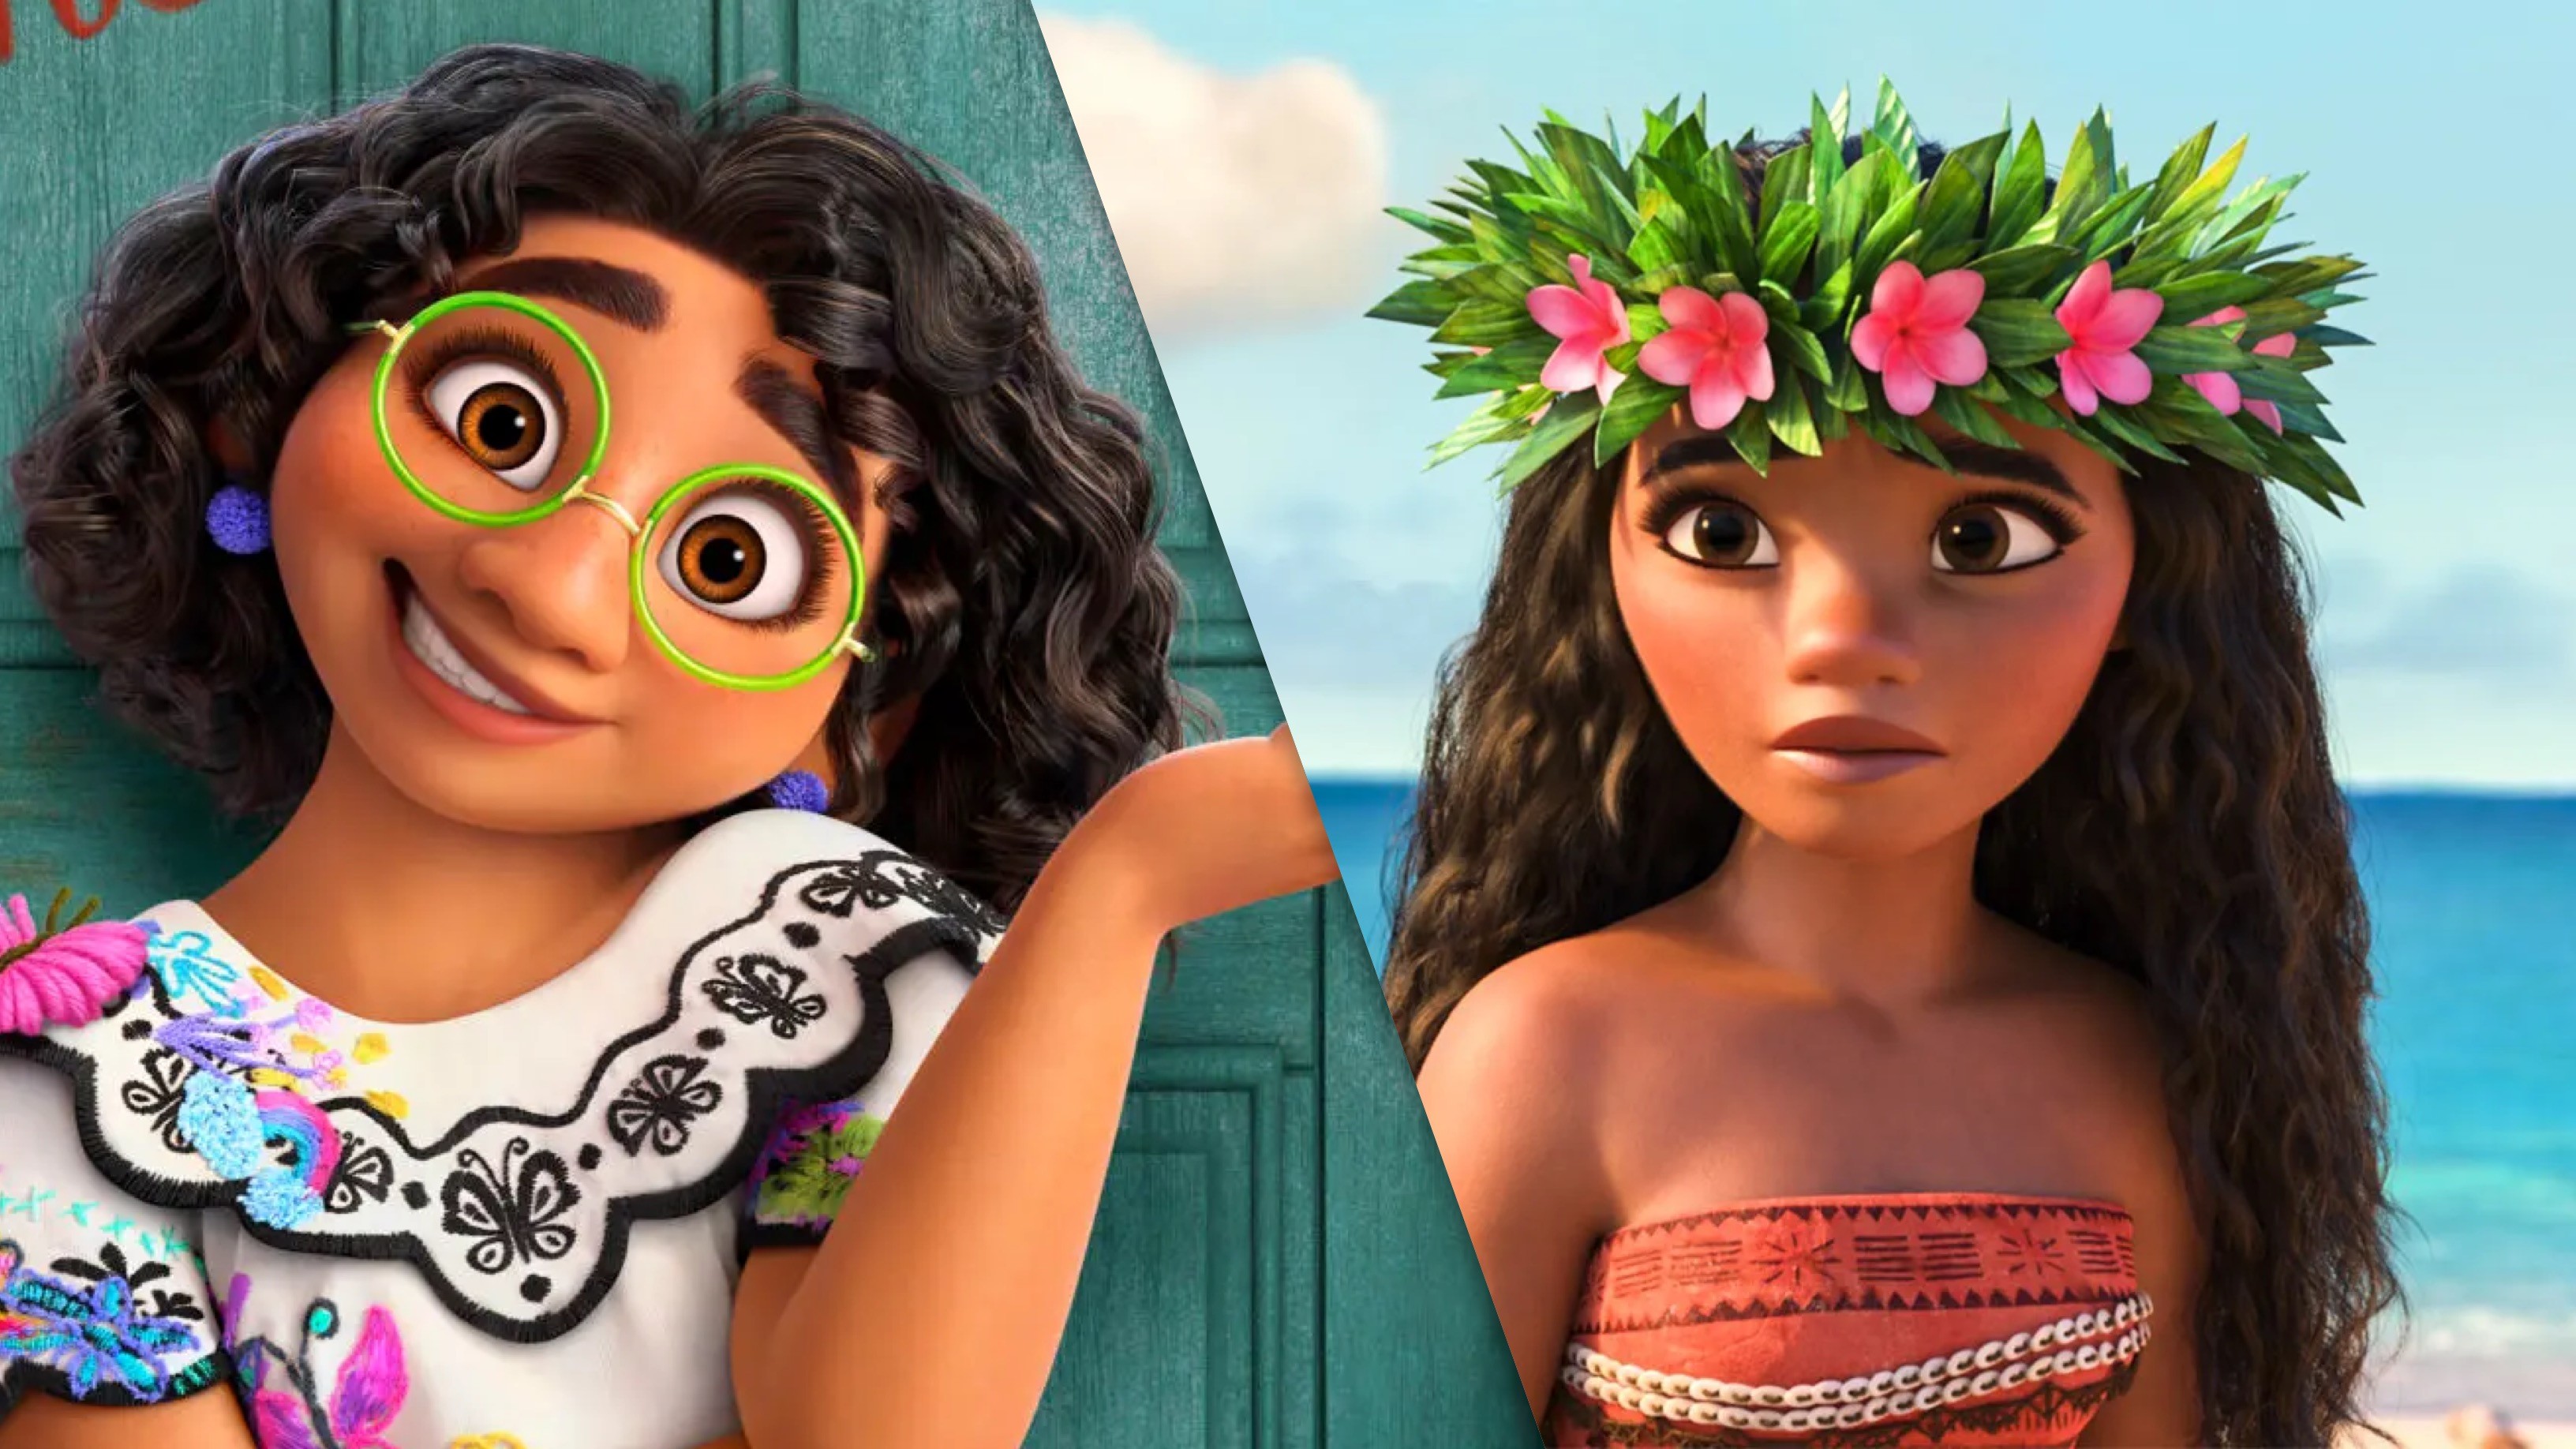 Encanto' Director Jared Bush Discusses The Family Aspect and Compares to ' Moana' - The DisInsider